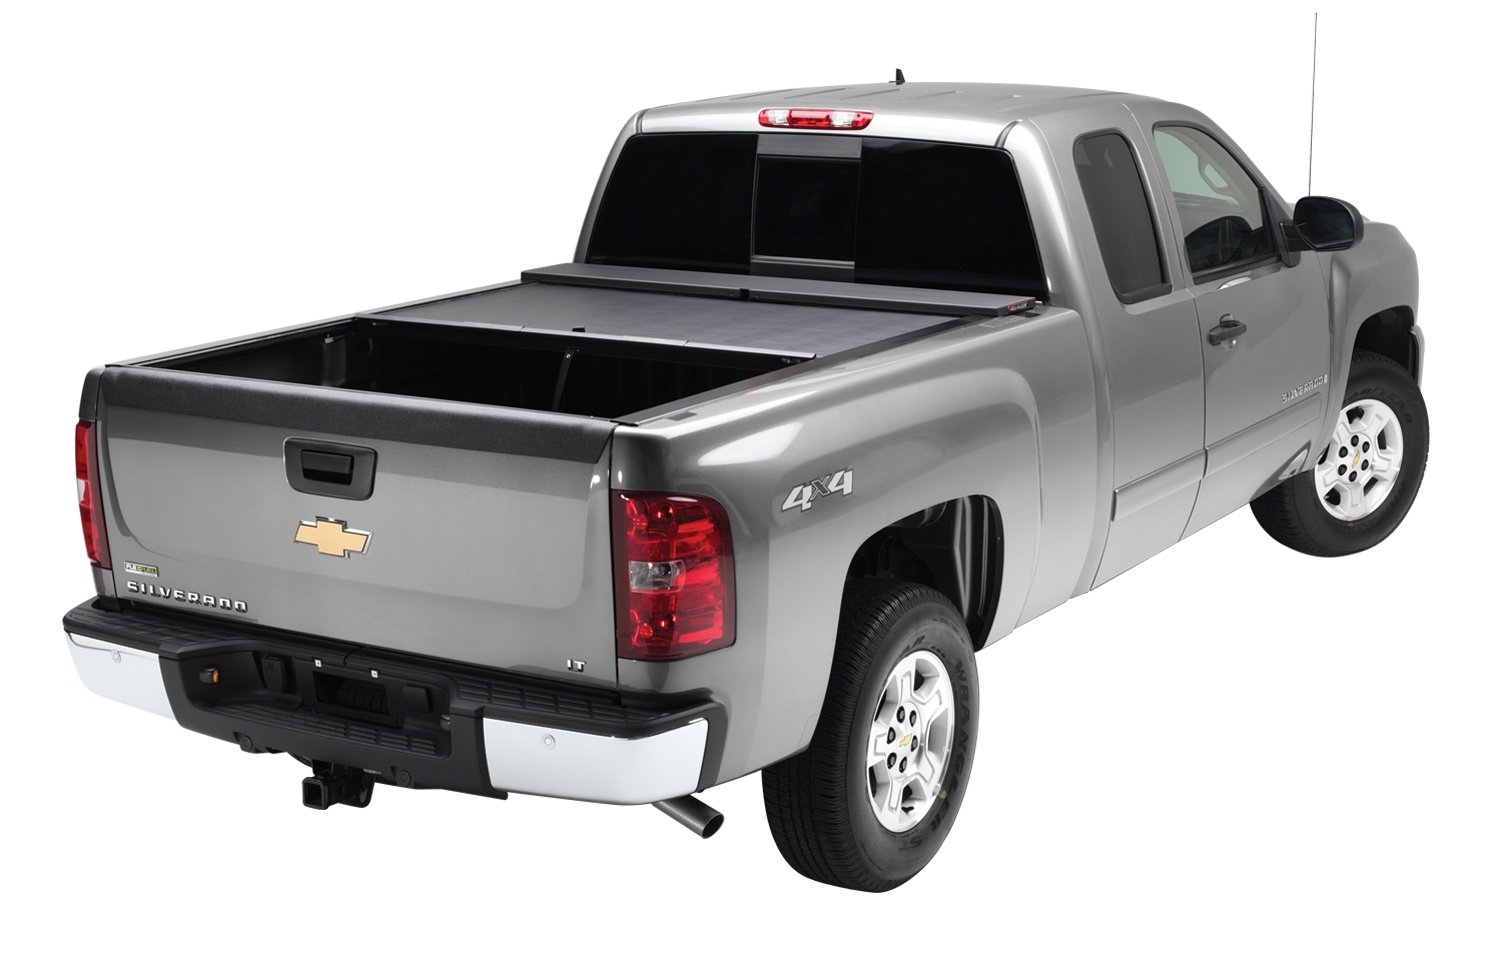 LG219M M-Series Locking Retractable Truck Bed Cover for 2007-2014 GM Silverado/Sierra 2500/3500, w/Bedrail Caps [8 ft. Bed]